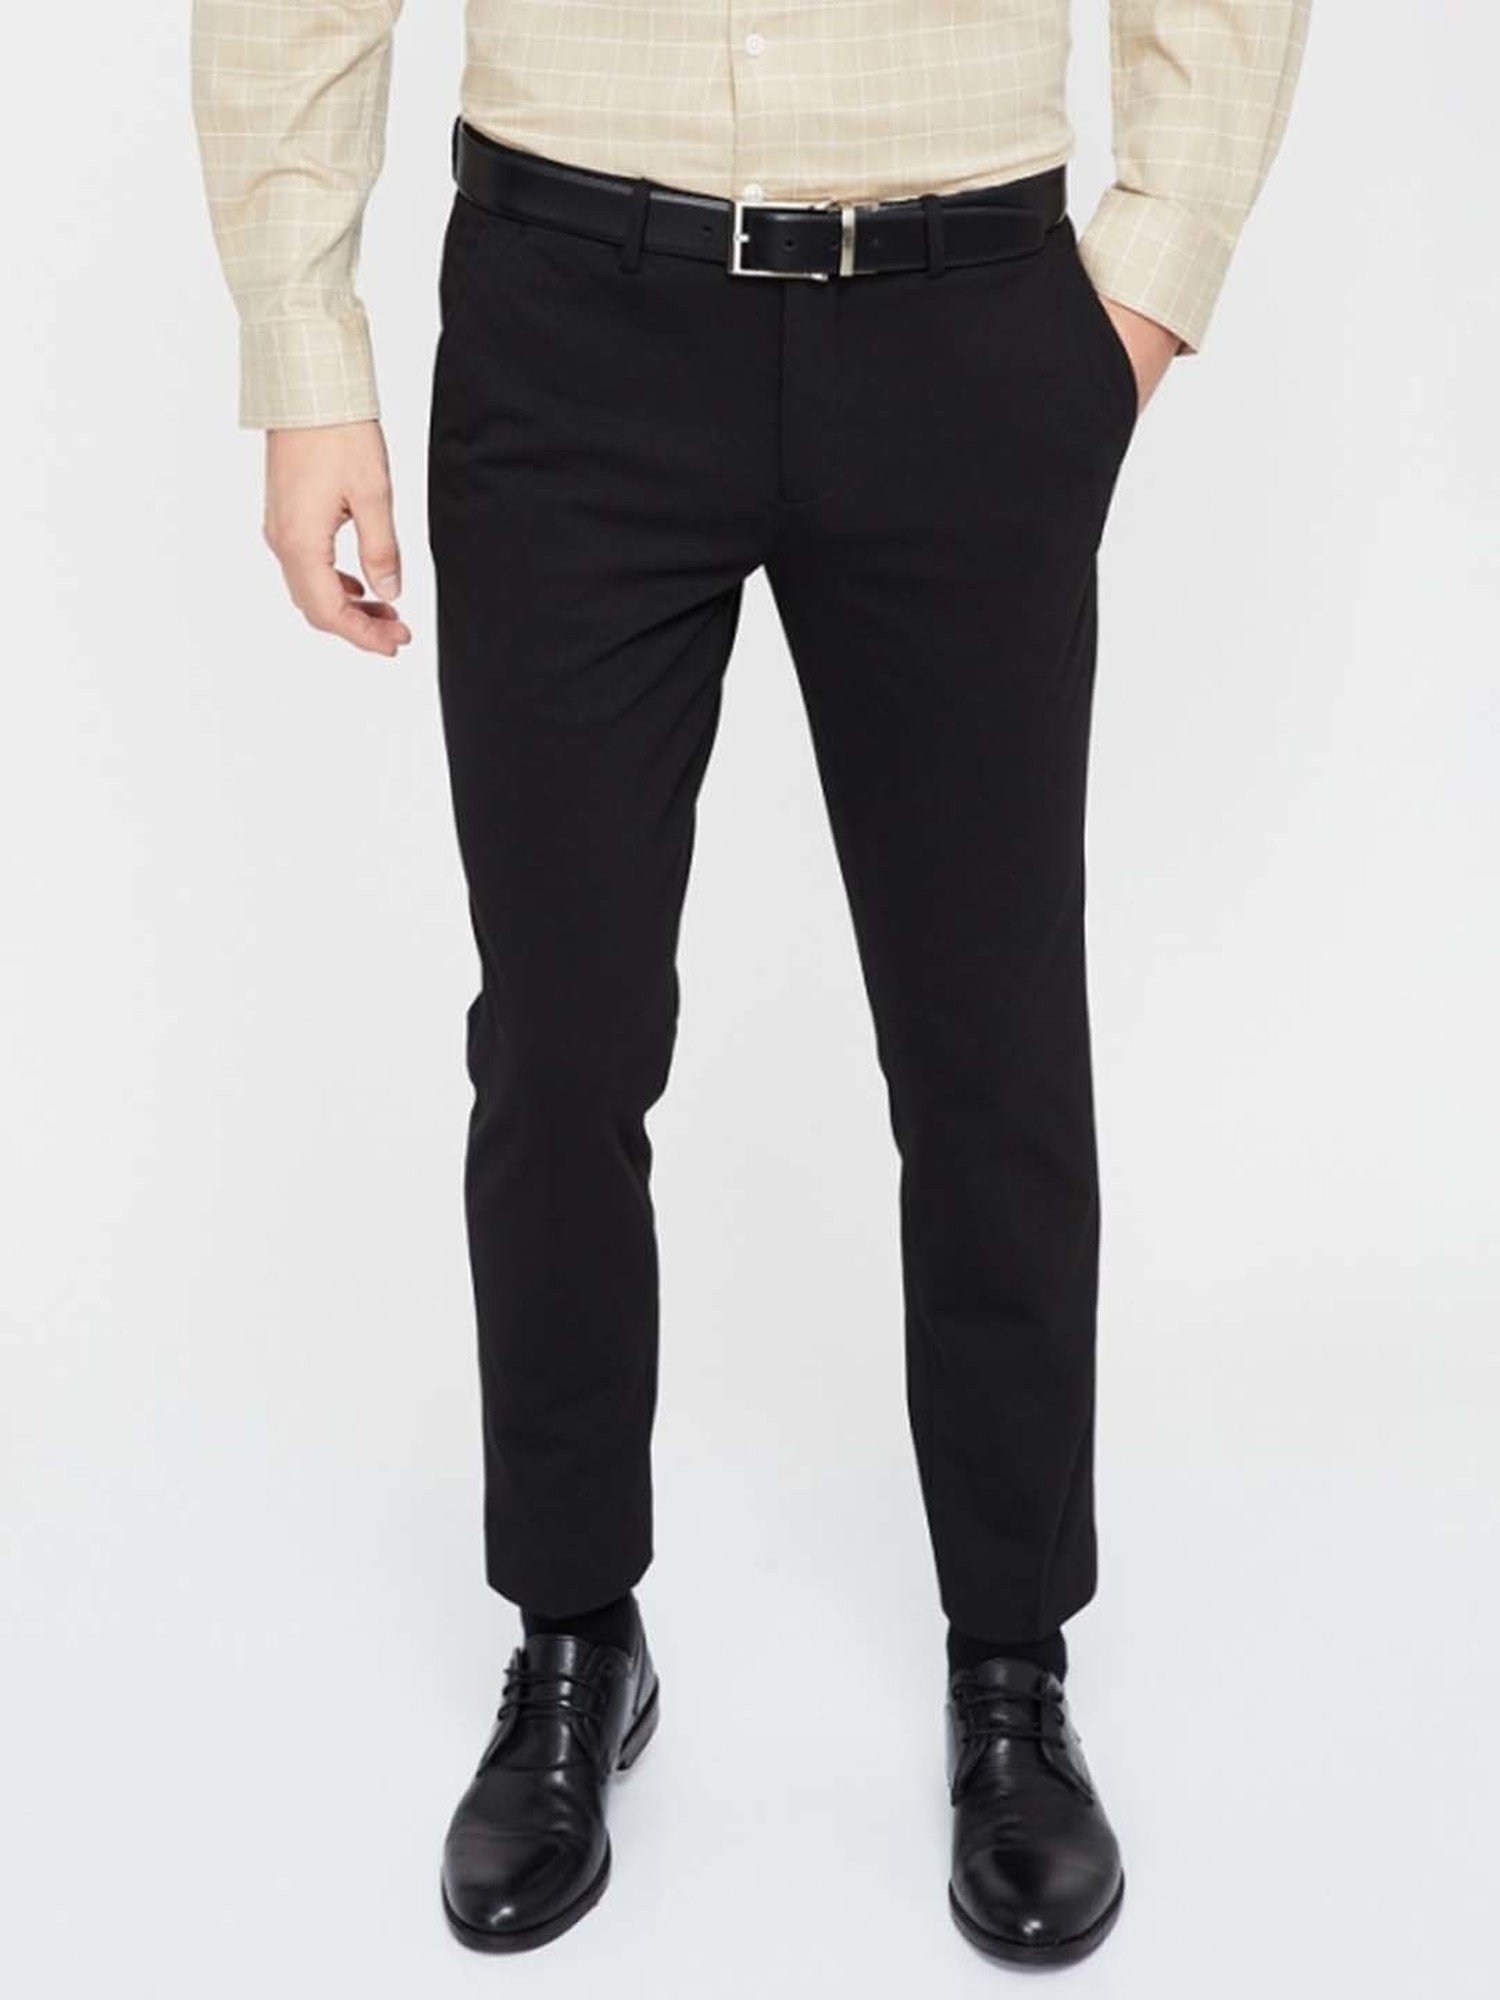 Suit Trousers  Buy Suit Trousers online in India